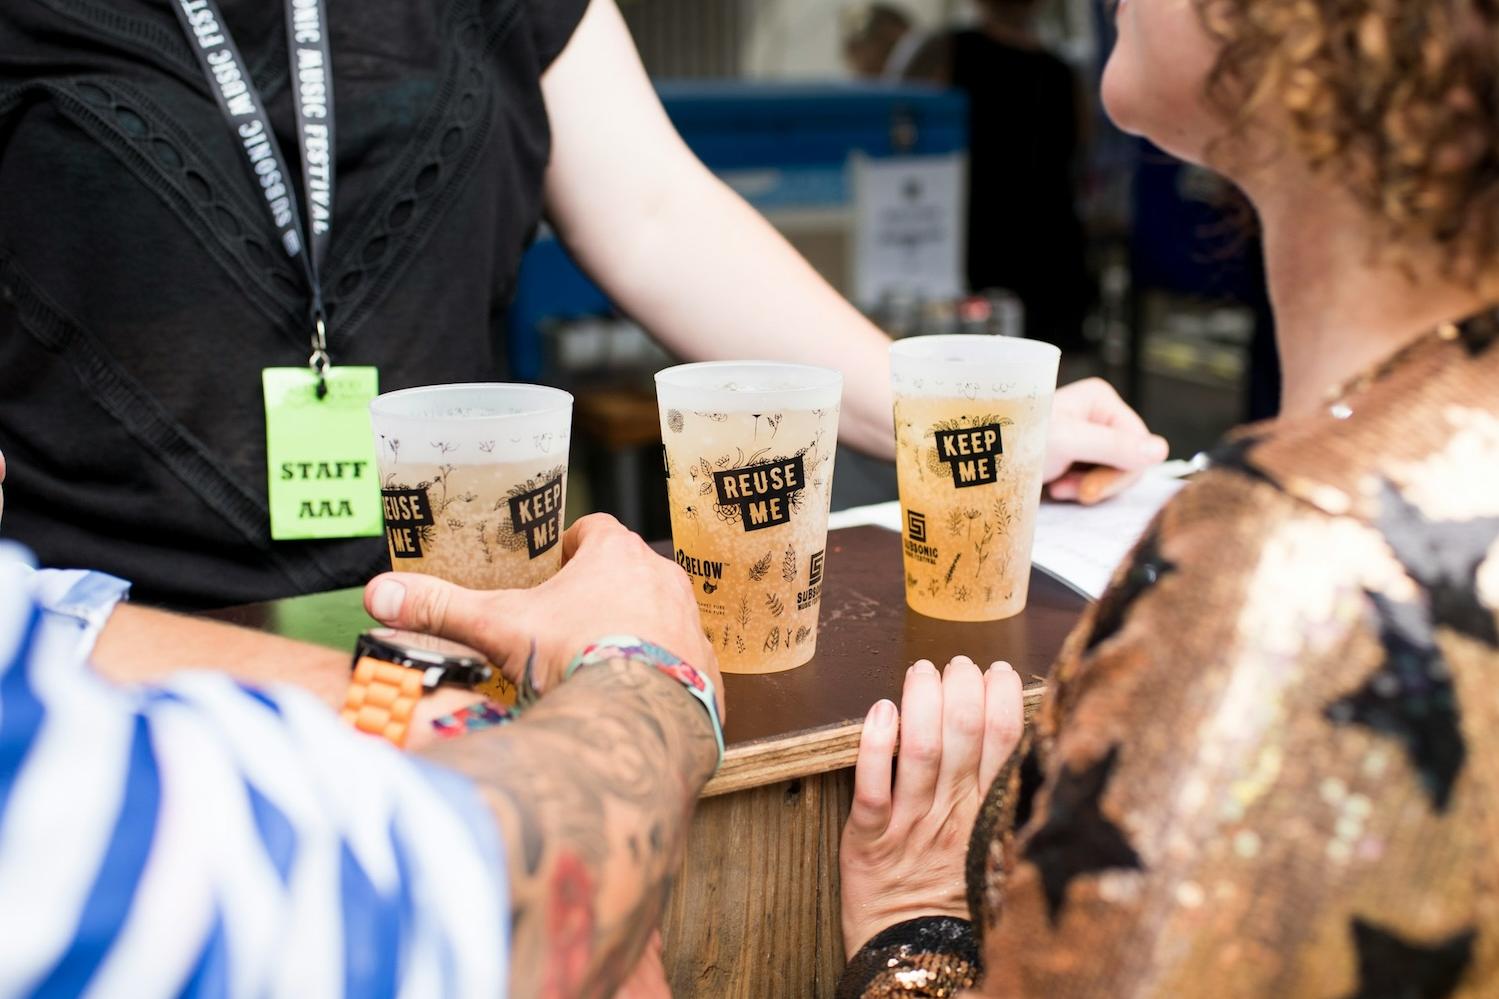 people get drinks in reusable cups at a music festival in australia - reuse and refill systems